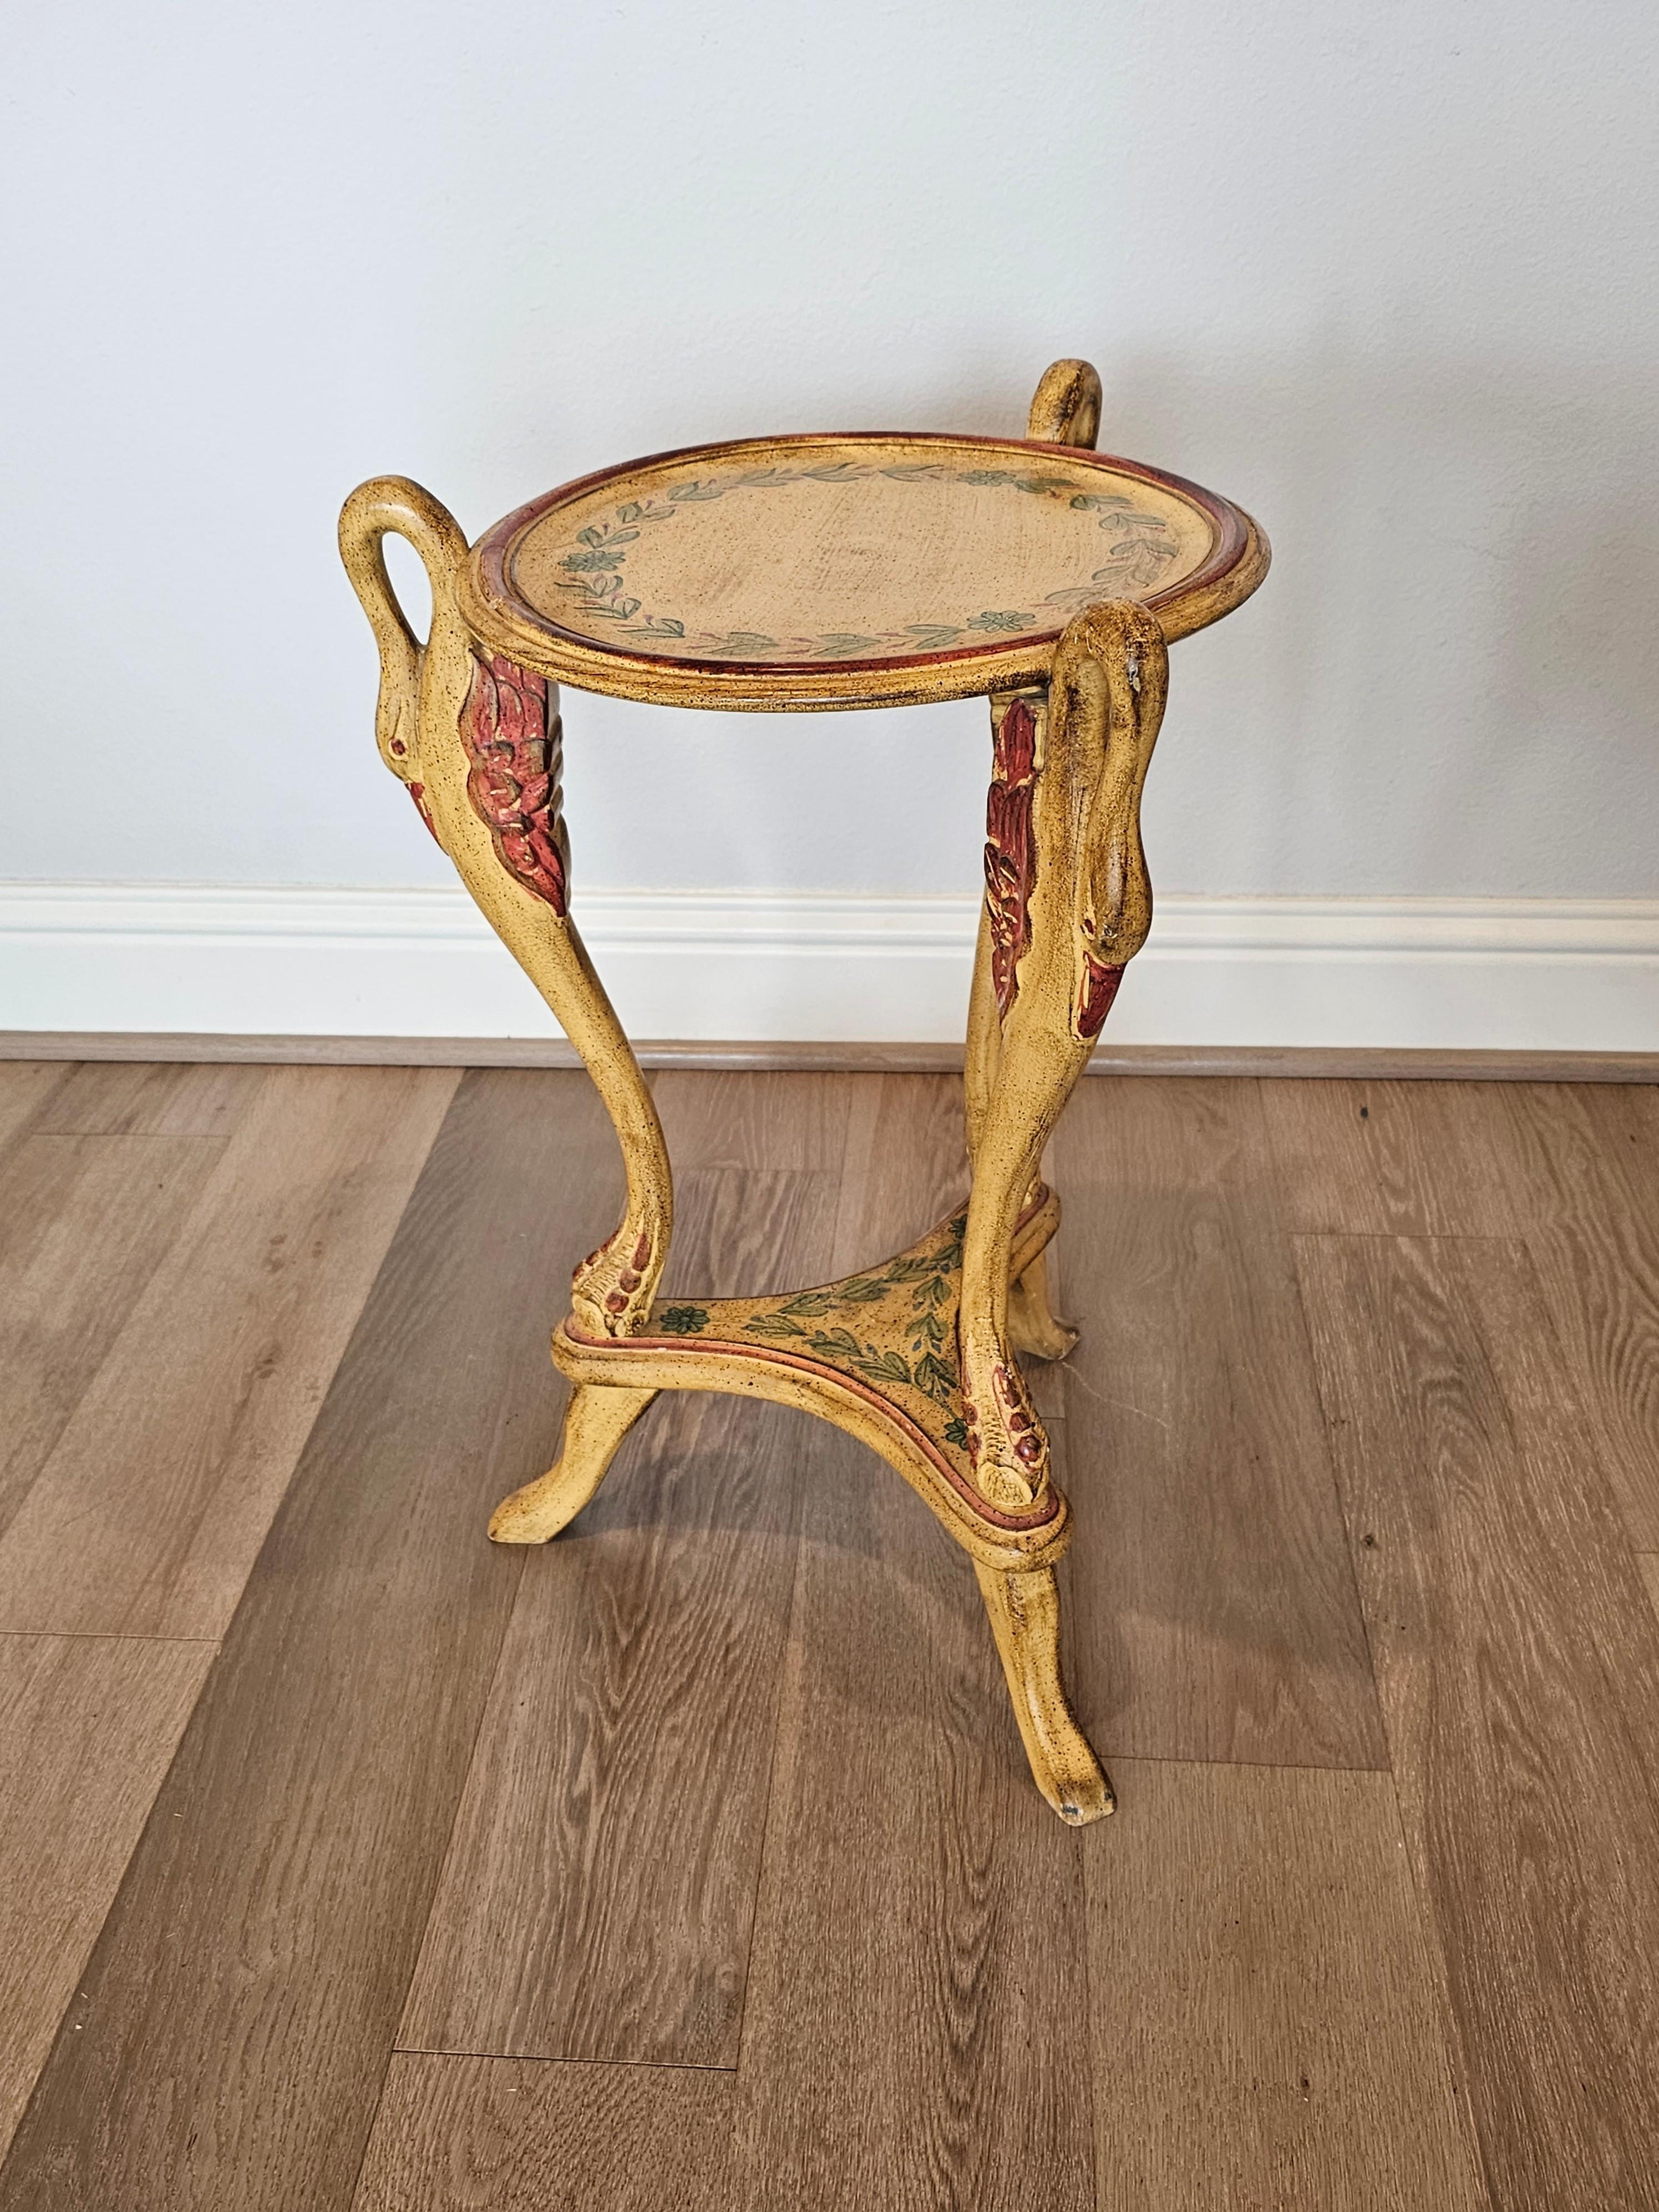 Gesso Vintage Neoclassical Revival Painted Swan Guéridon Table For Sale